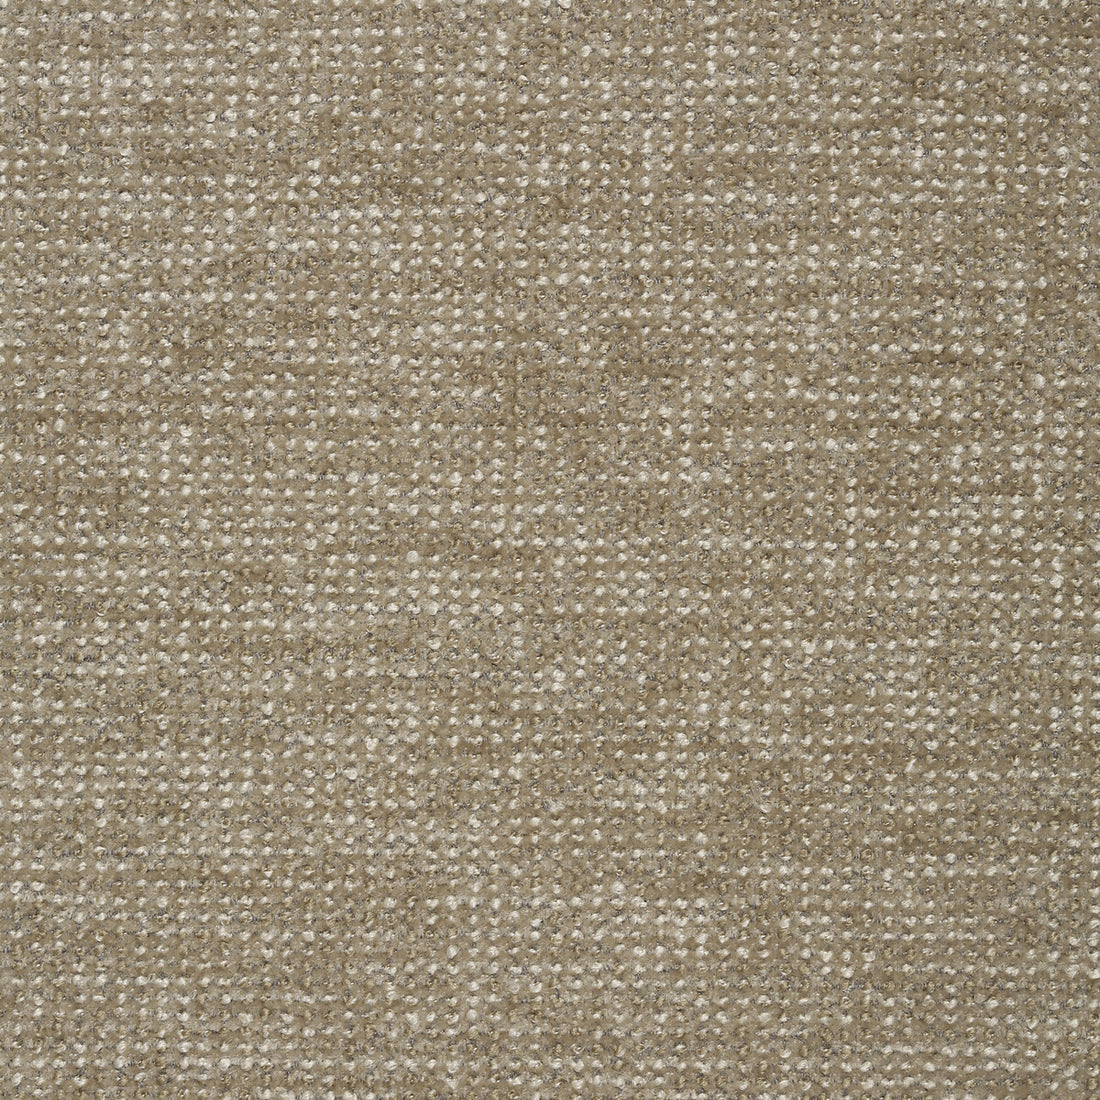 Kravet Smart fabric in 35115-106 color - pattern 35115.106.0 - by Kravet Smart in the Crypton Home collection